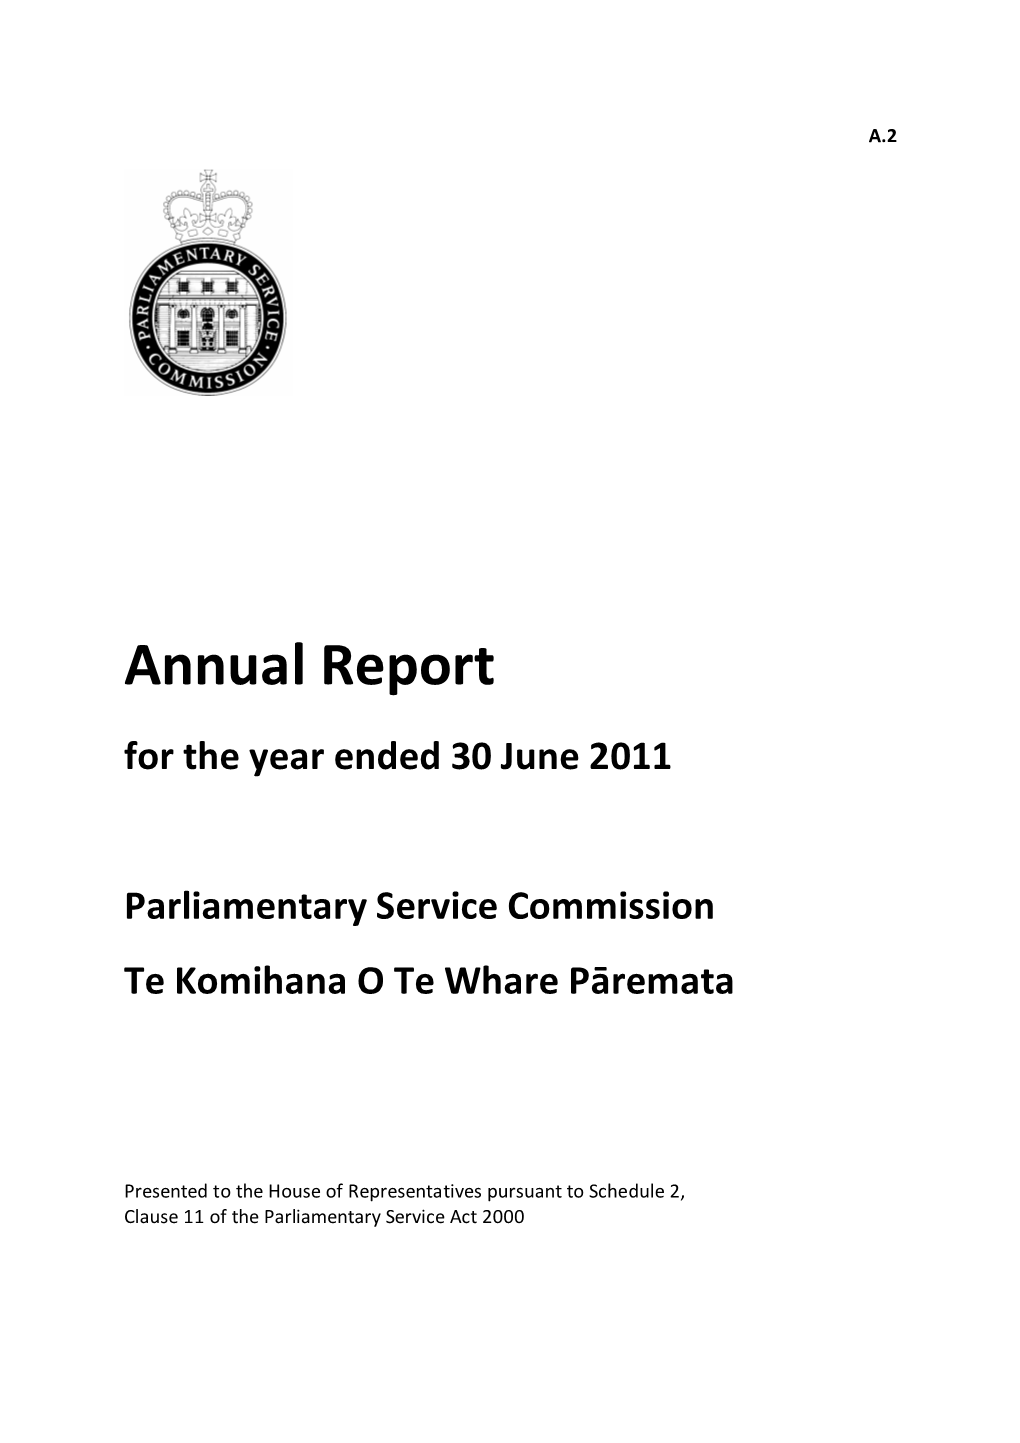 Annual Report for the Year Ended 30 June 2011